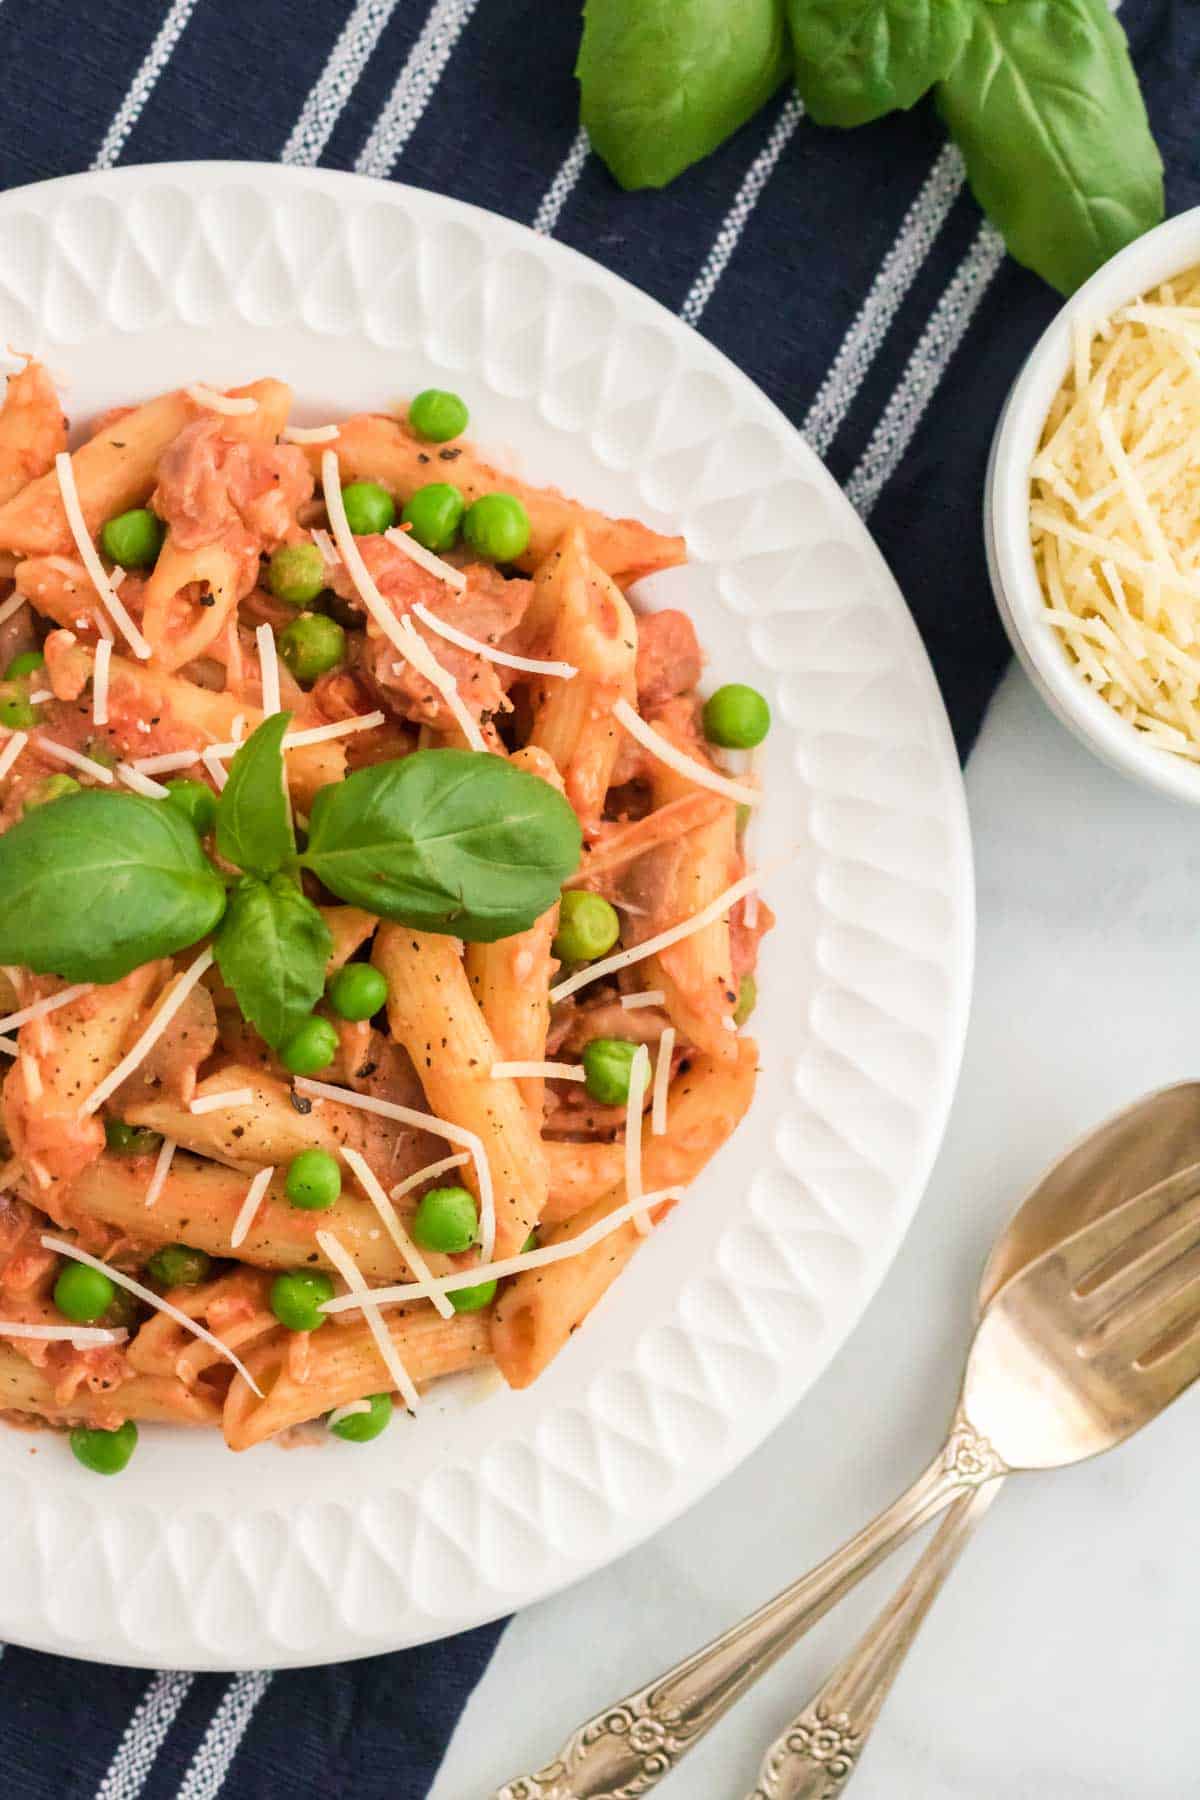 Penne with tomato cream sauce on a plate topped with peas and prosciutto.